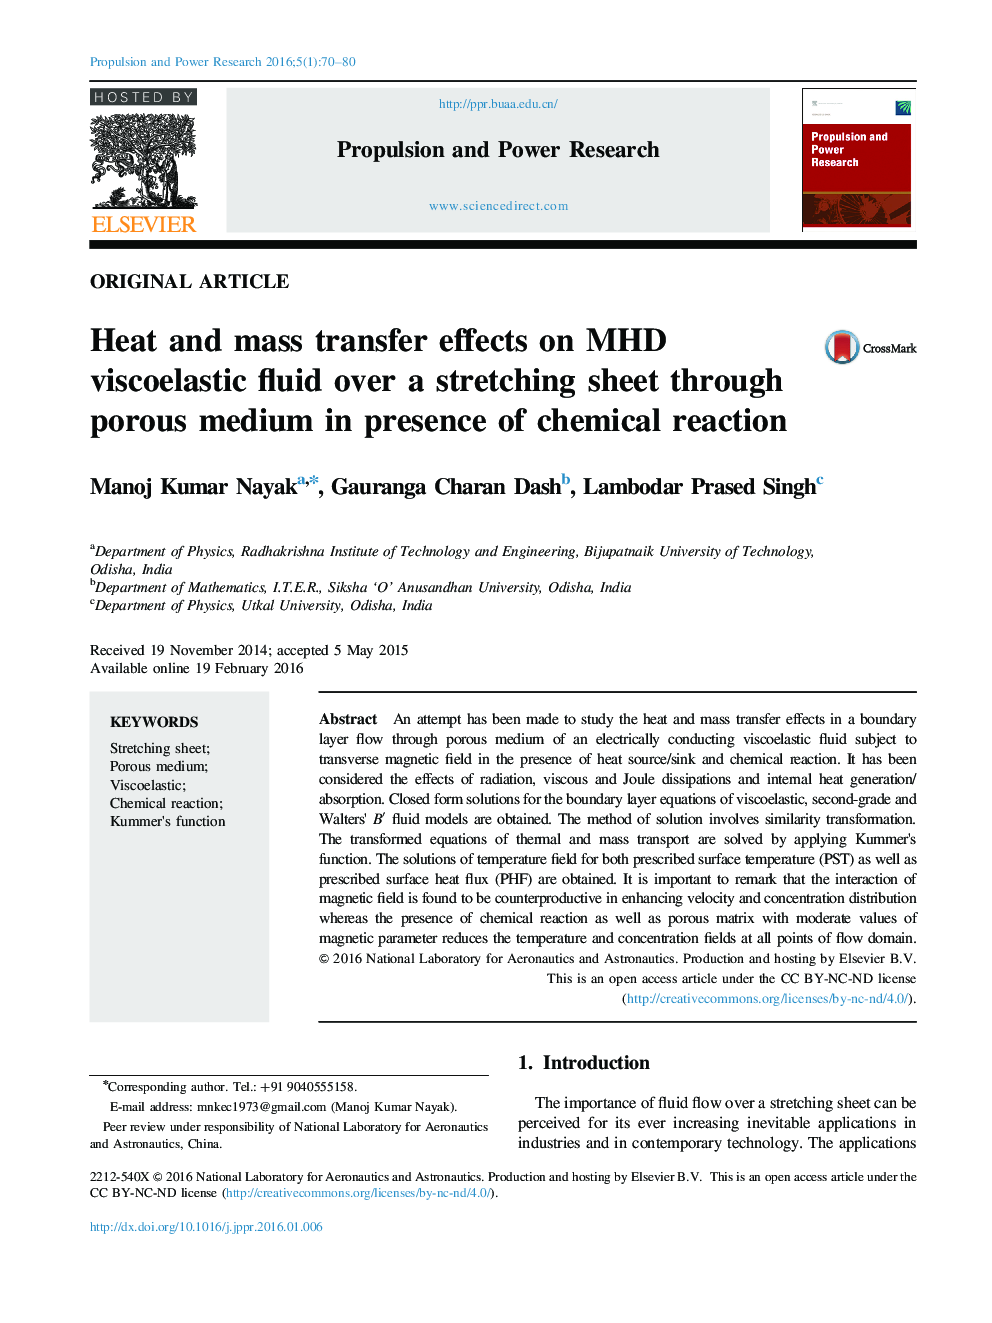 Heat and mass transfer effects on MHD viscoelastic fluid over a stretching sheet through porous medium in presence of chemical reaction 